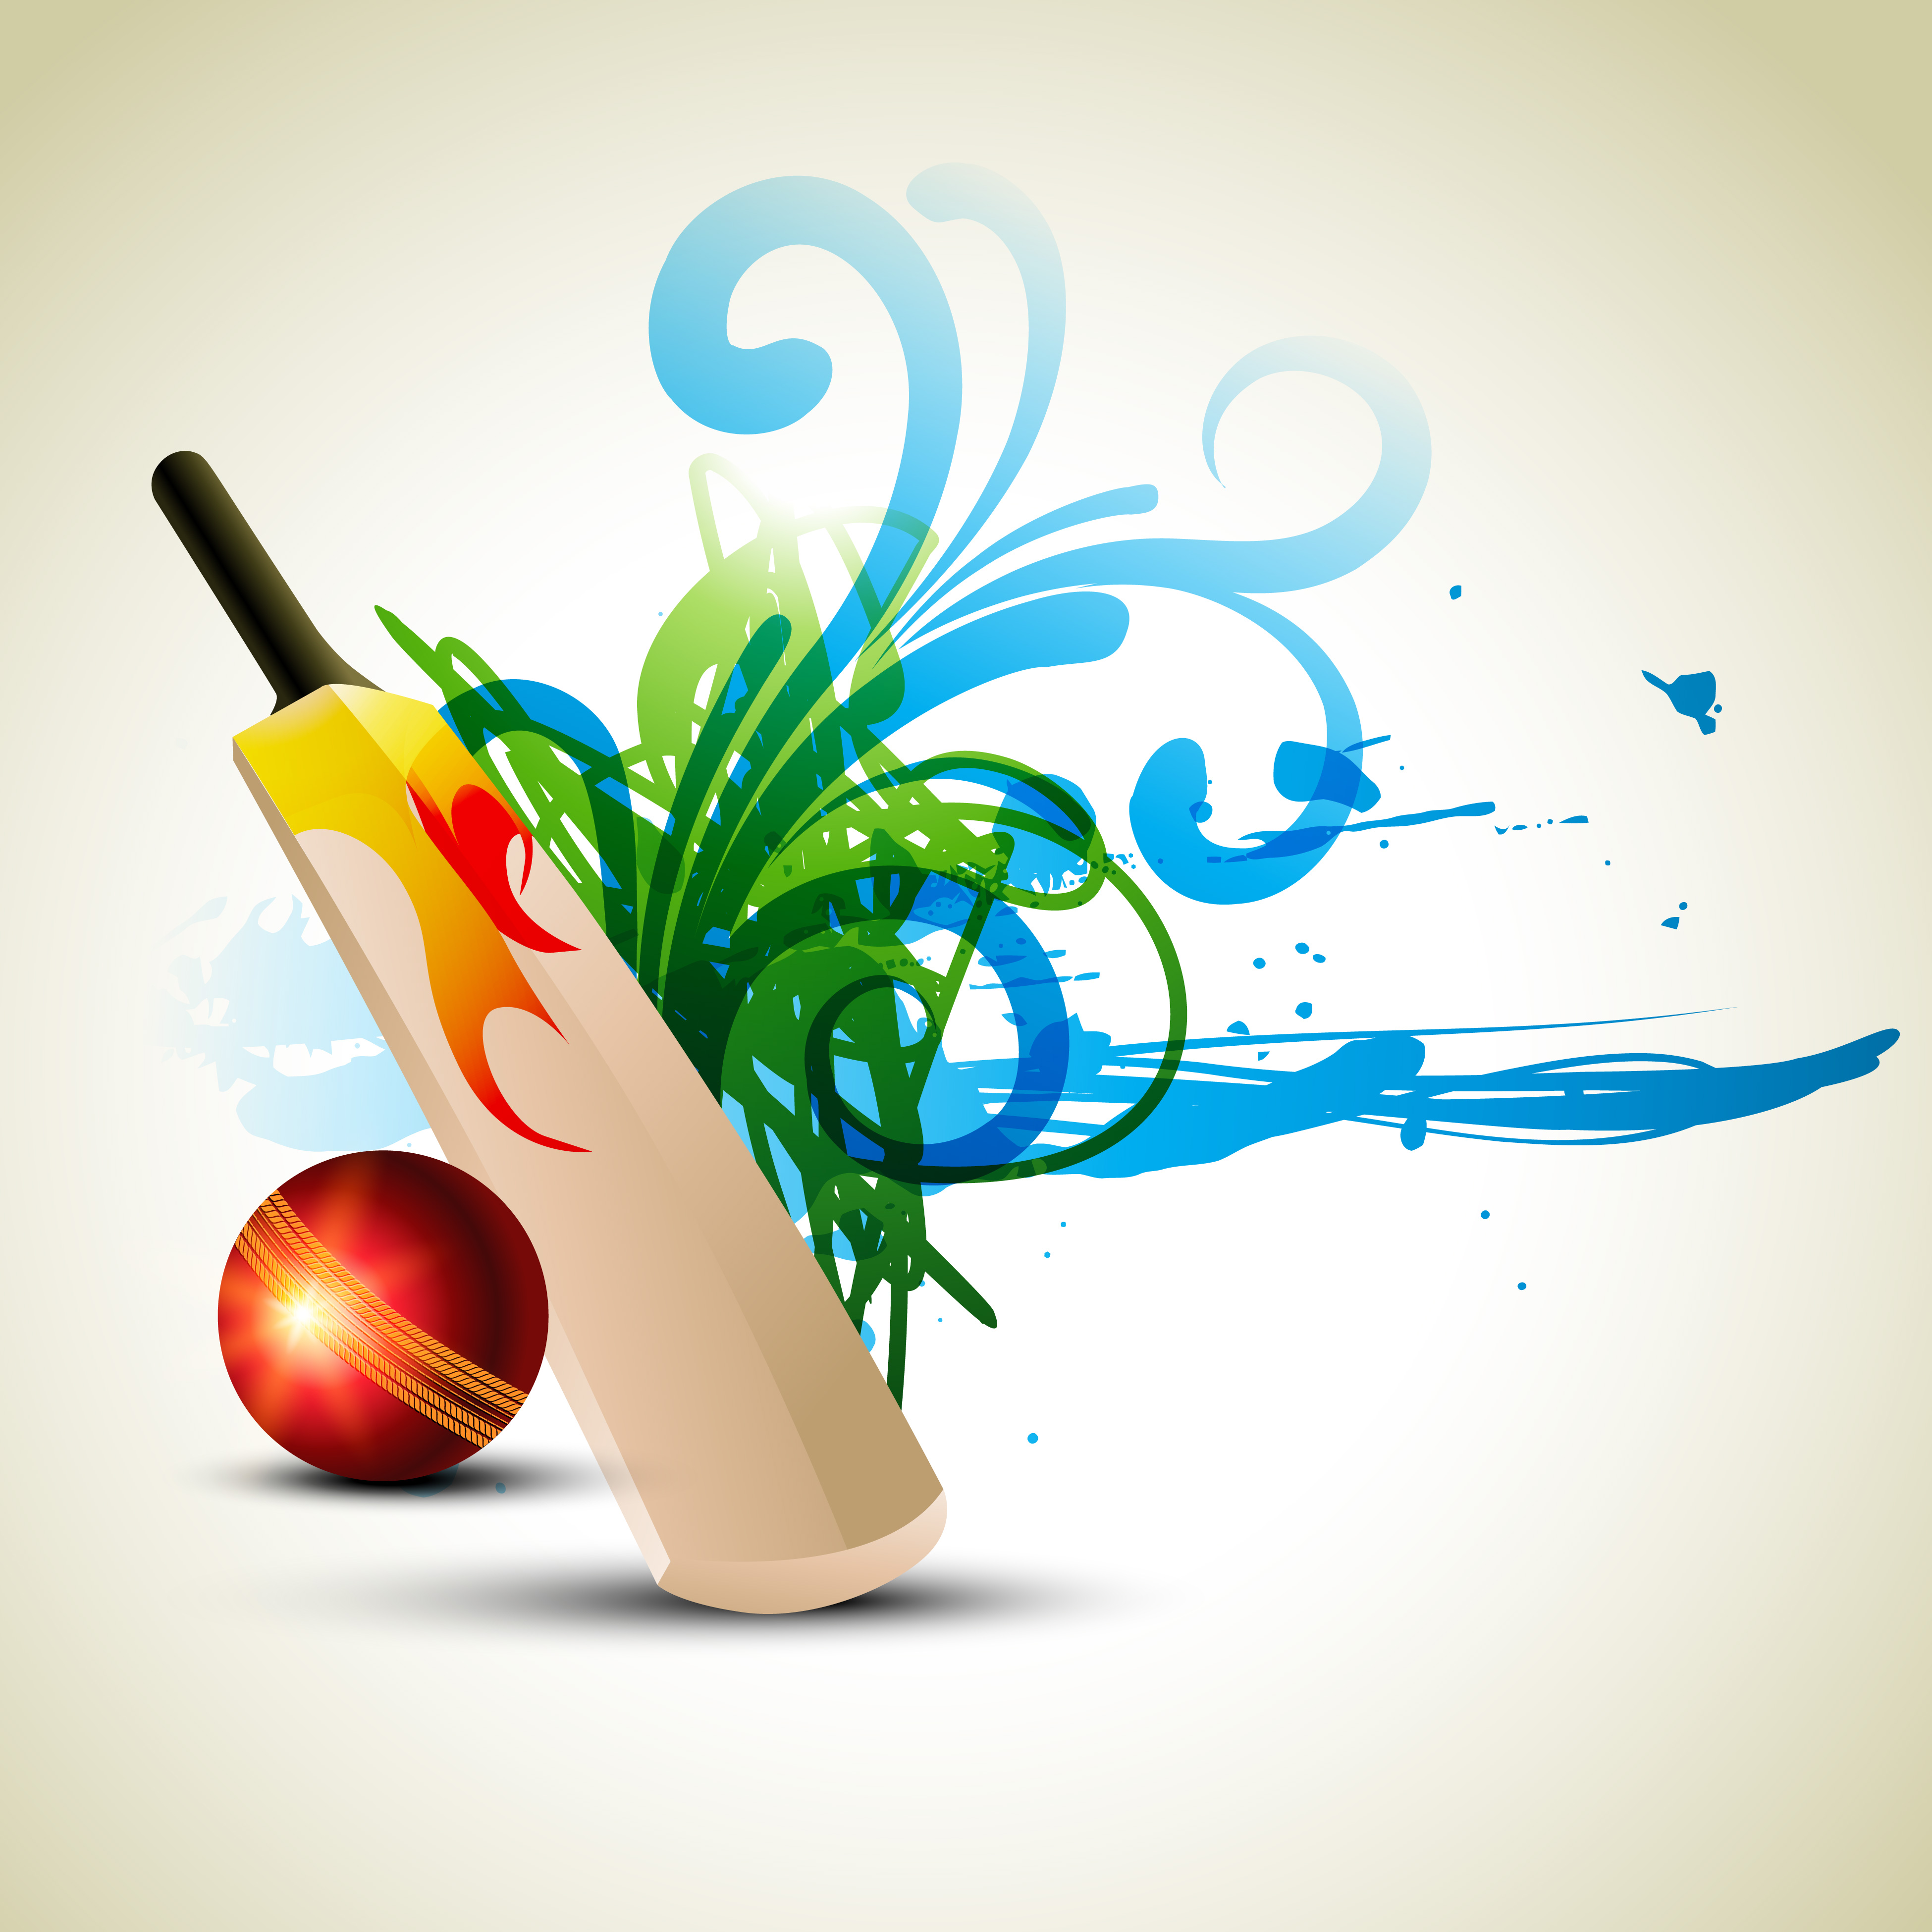 free designs for cricket